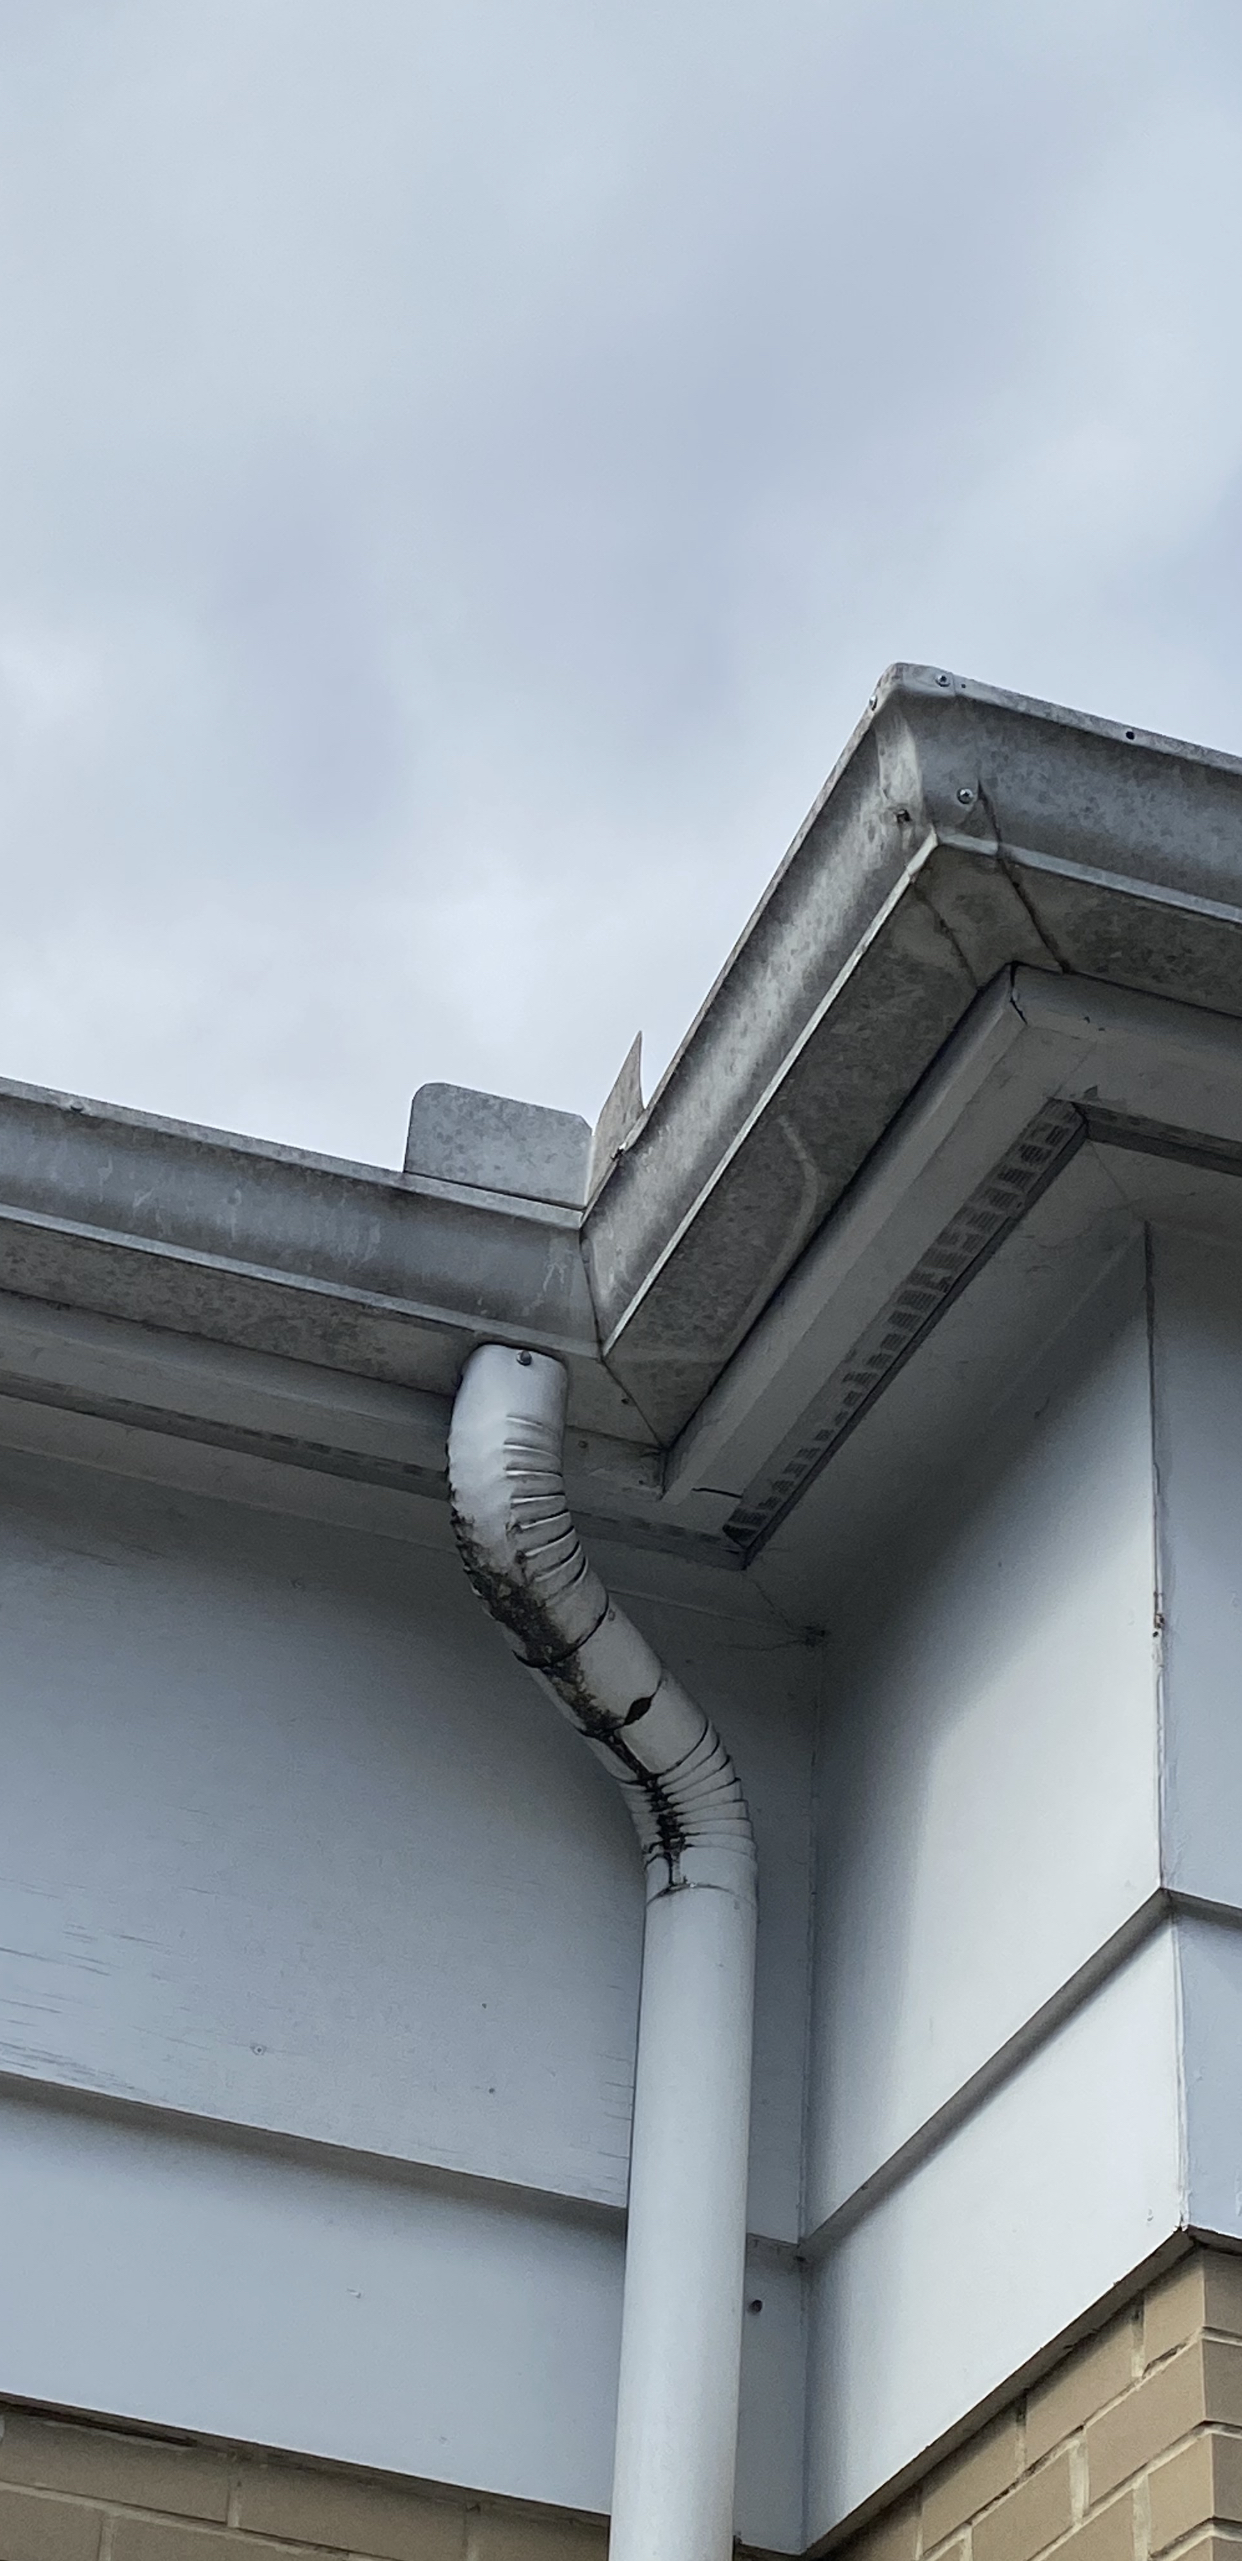 These gutters and facia show signs of leaking and malfunctioning